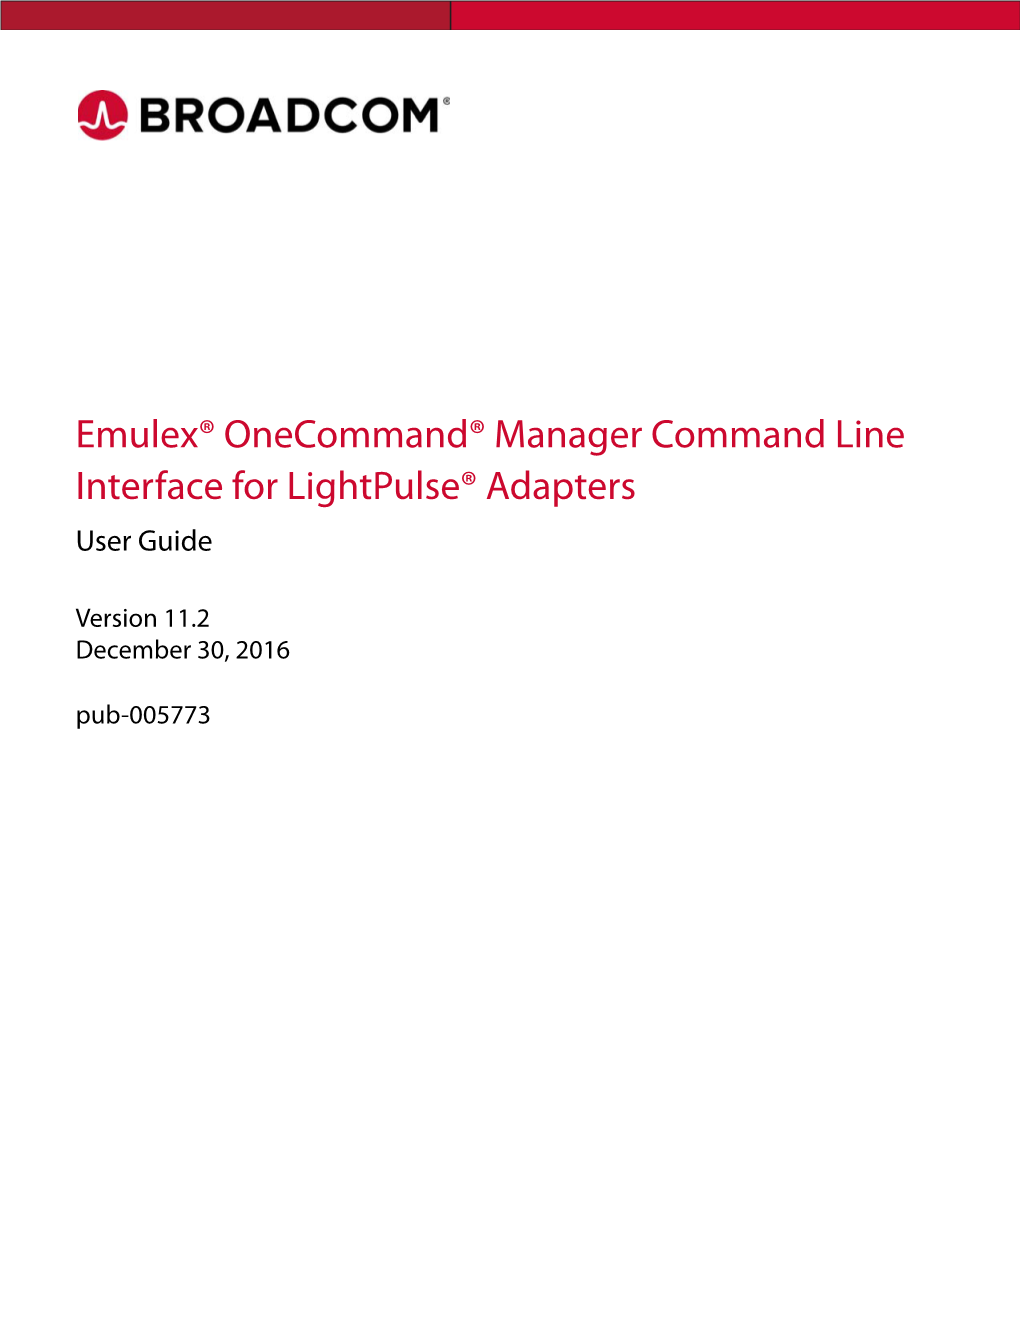 Emulex® Onecommand® Manager Command Line Interface for Lightpulse® Adapters User Guide